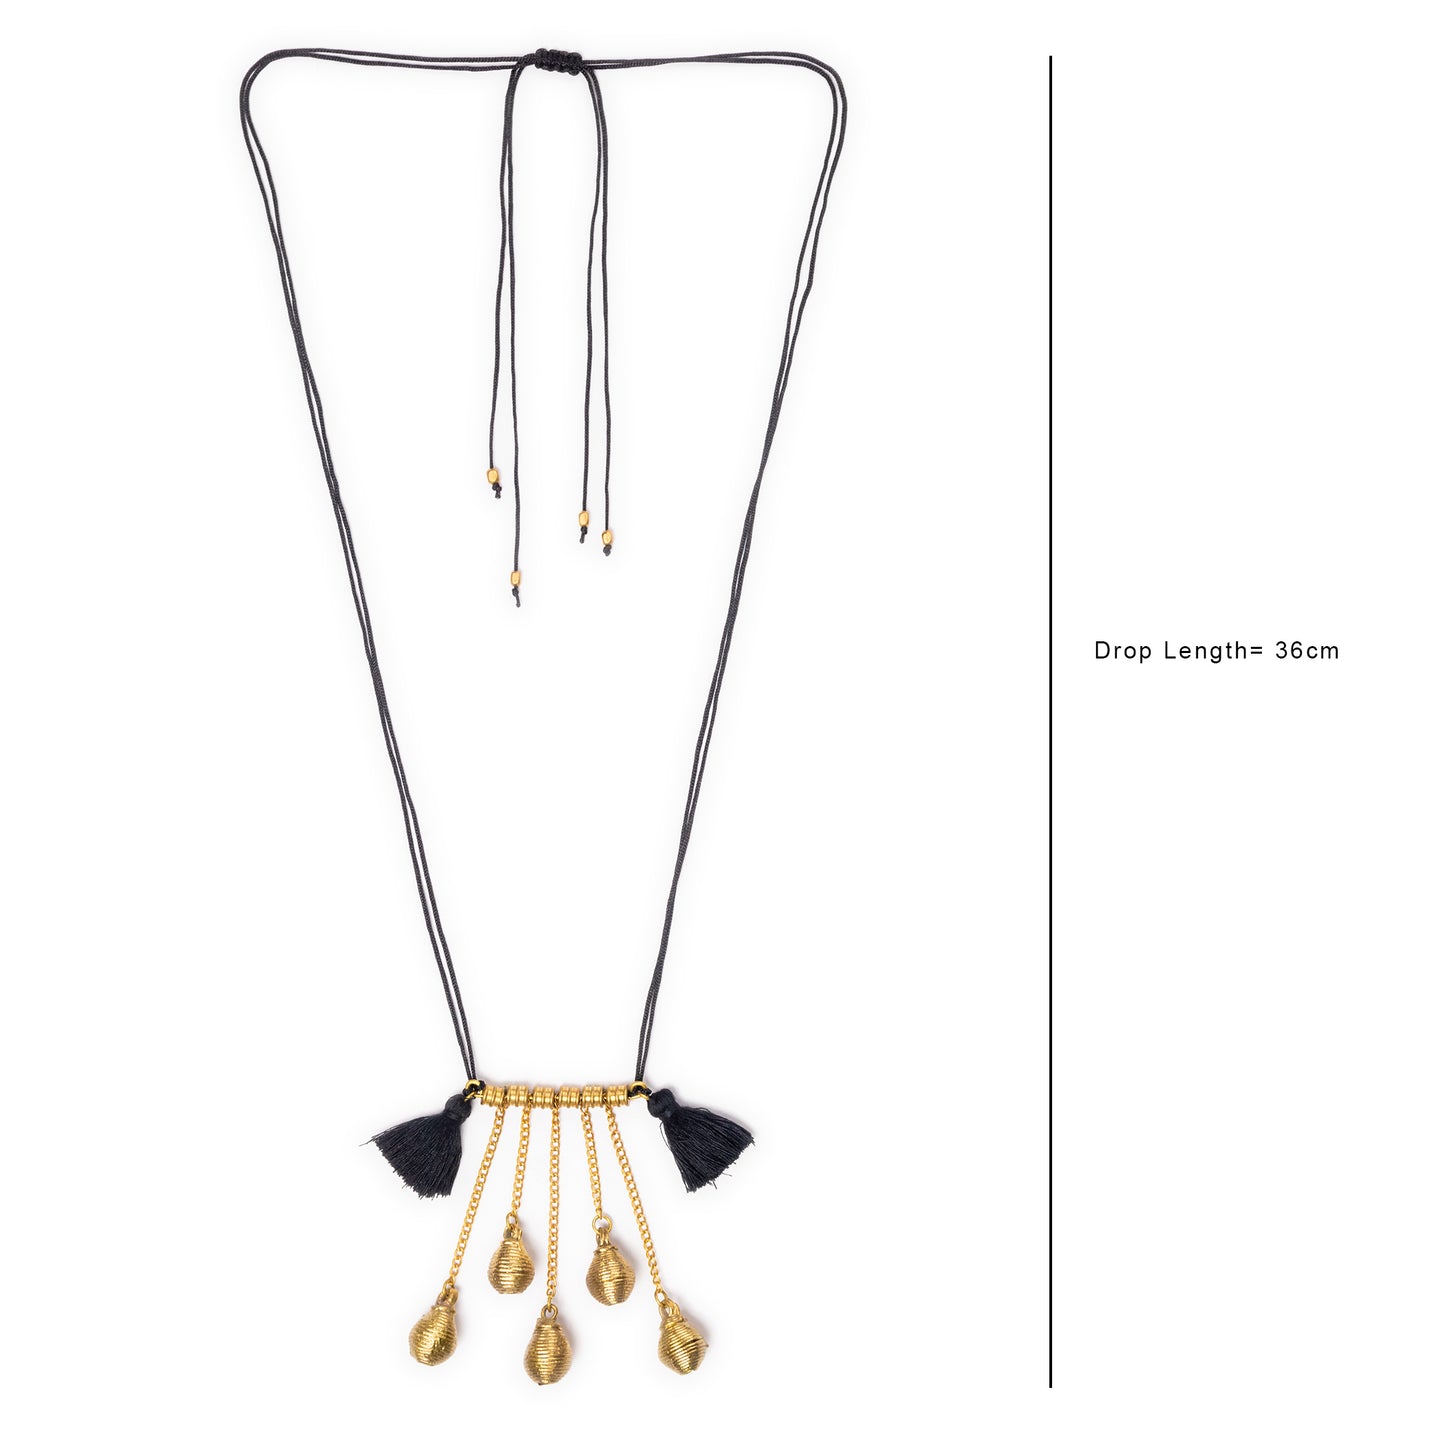 Black Gold Tone Dokra Necklace with Tassels